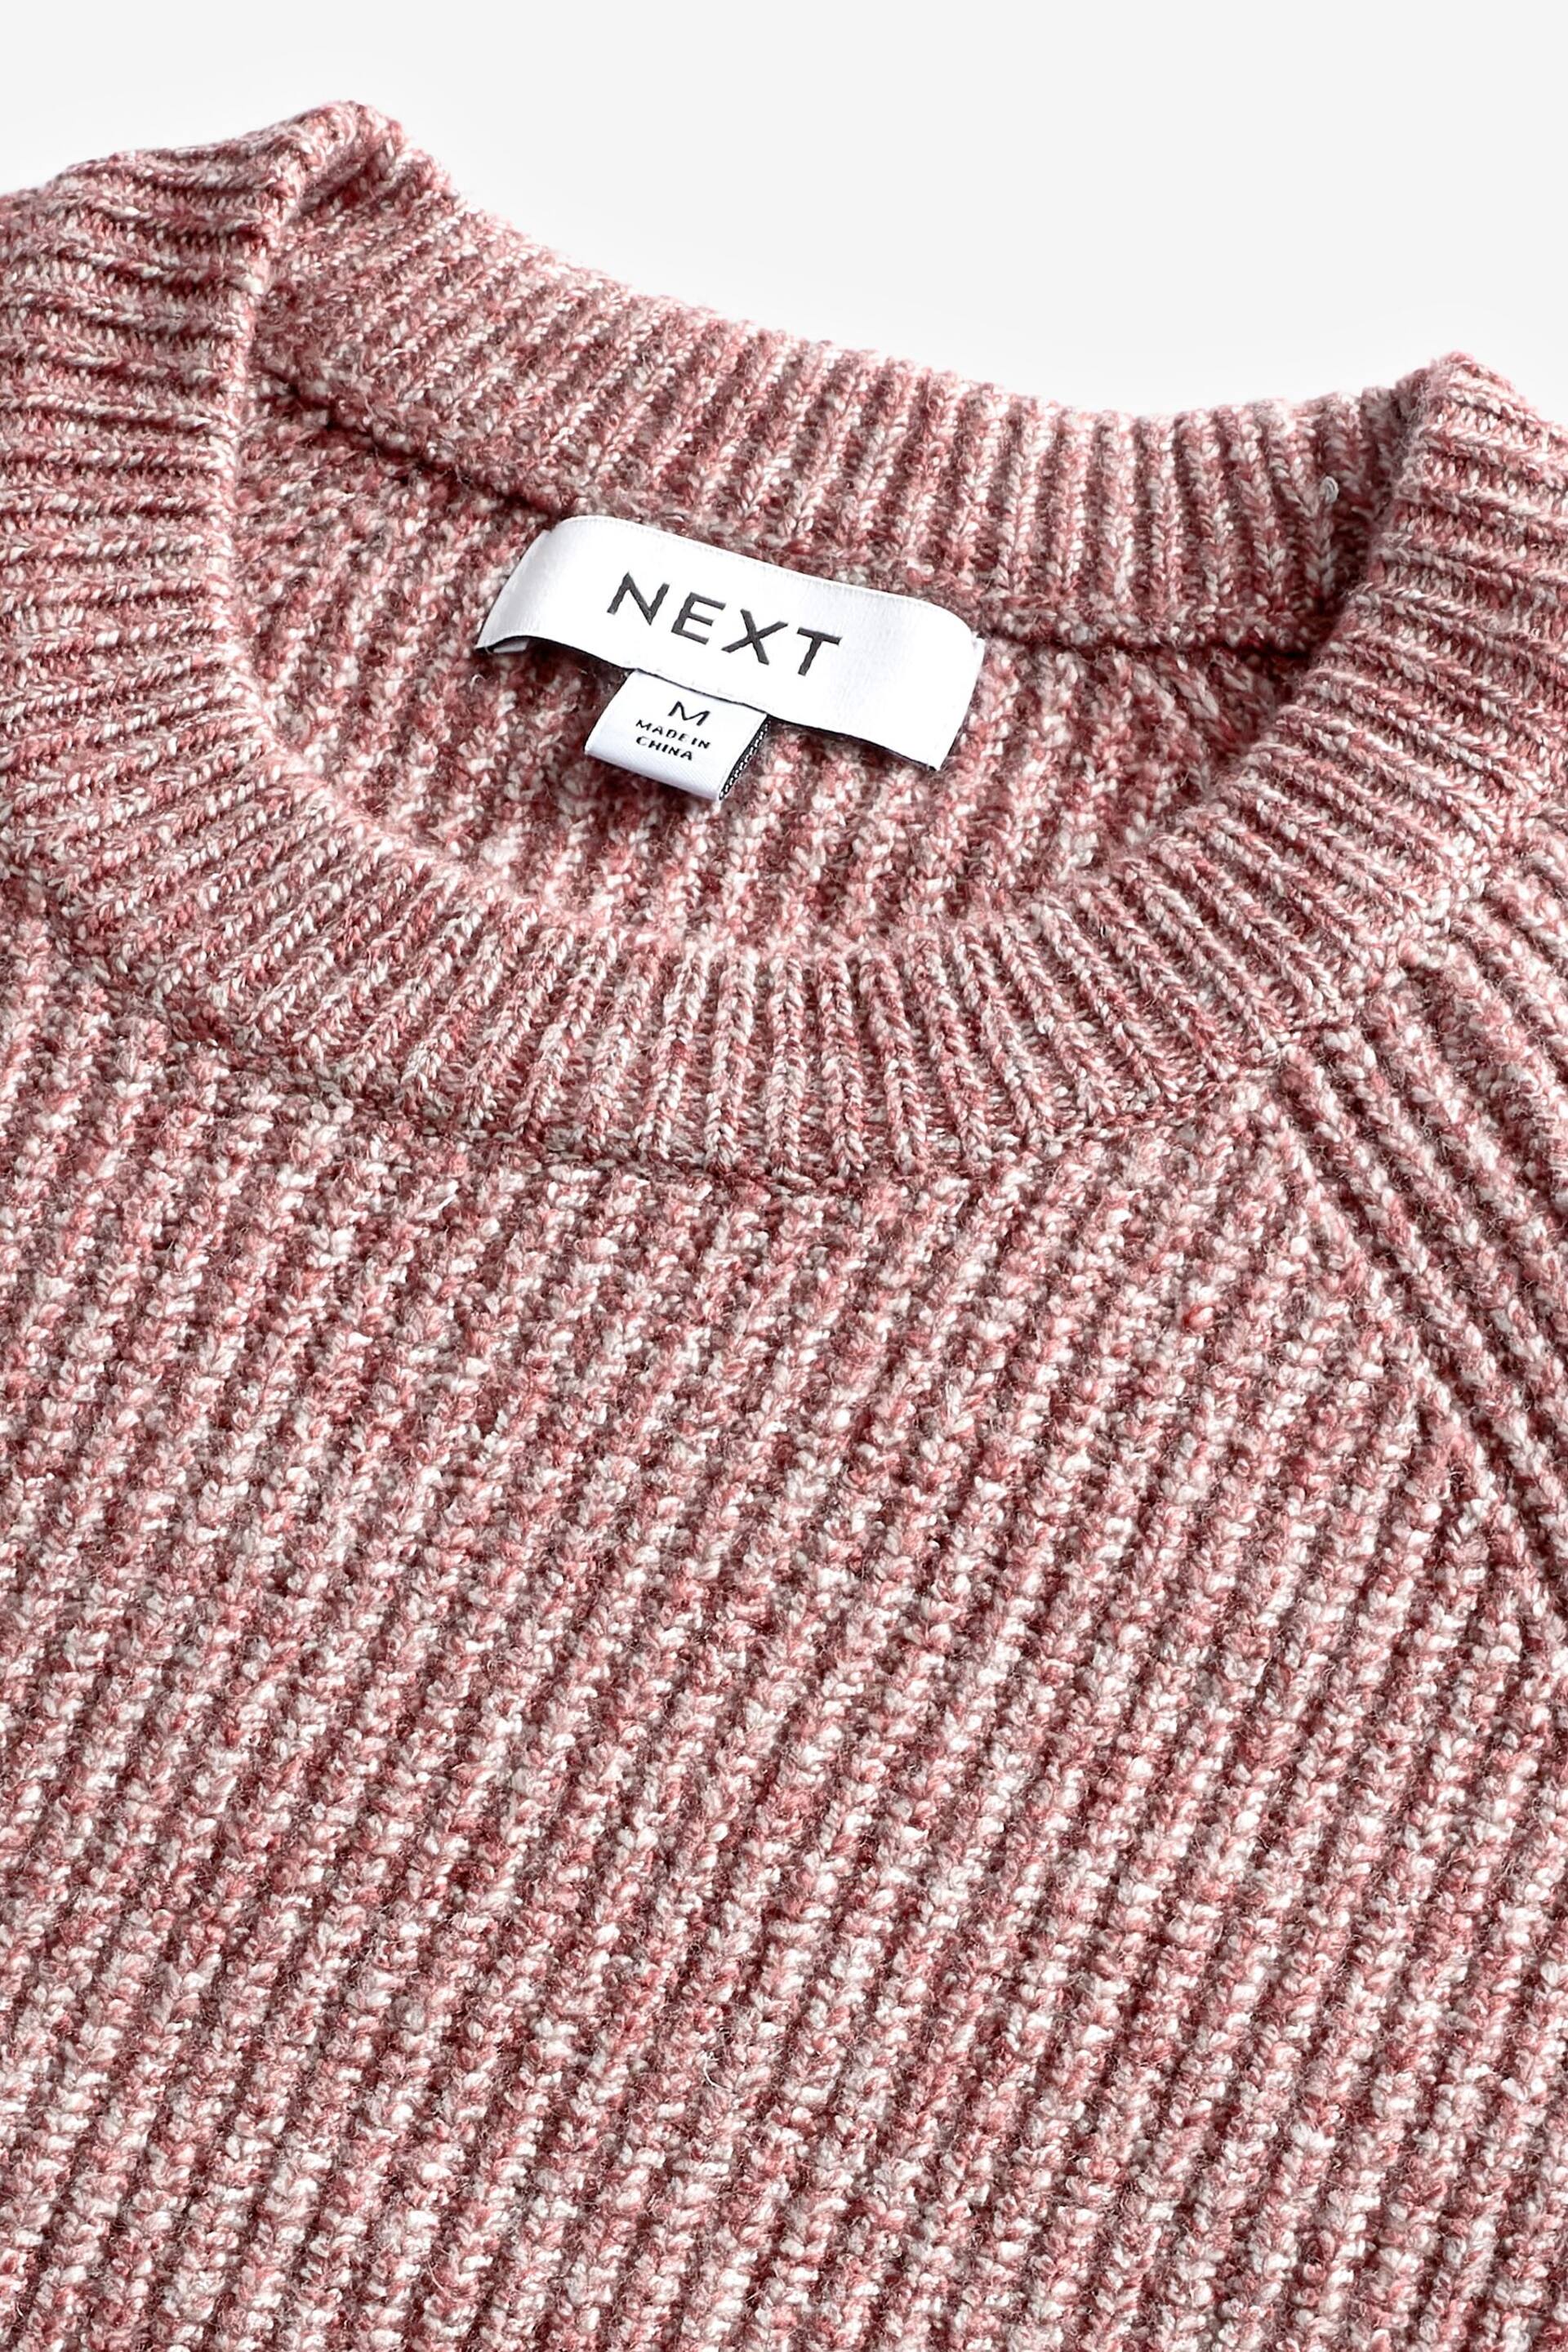 Red Regular Cosy Rib Knitted Jumper - Image 9 of 10